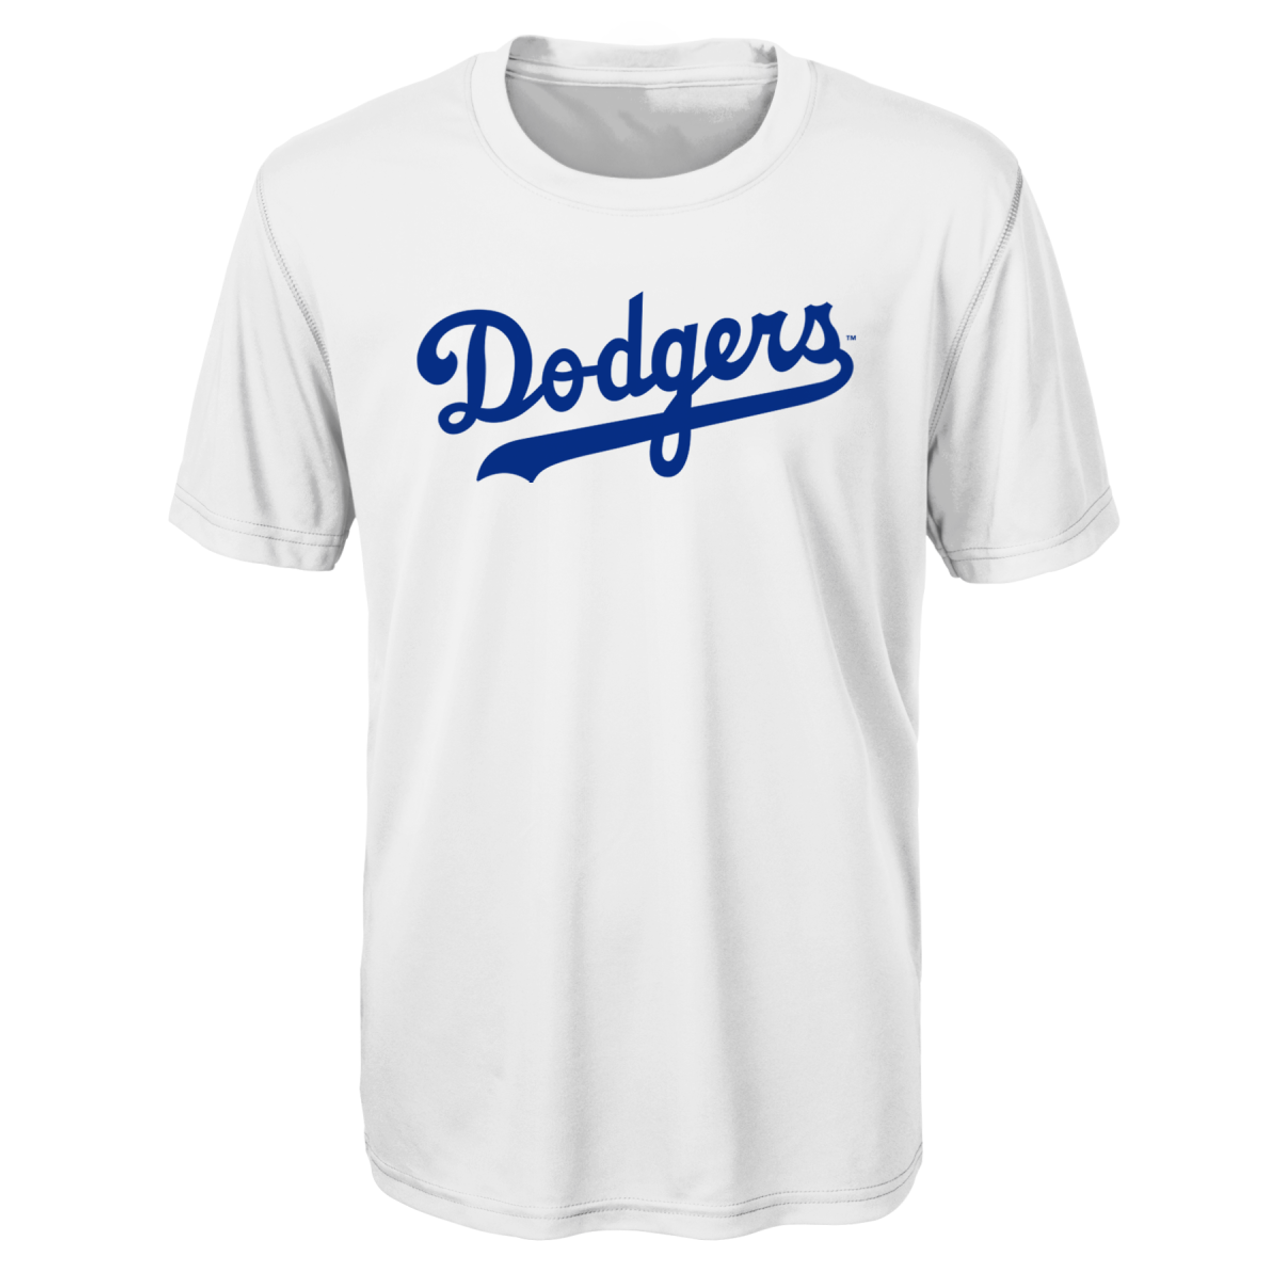 Wholesale White Throwback Jackie Robinson Jersey Men's #42 Los Angeles  Dodgers baseball jersey S-5XL From m.